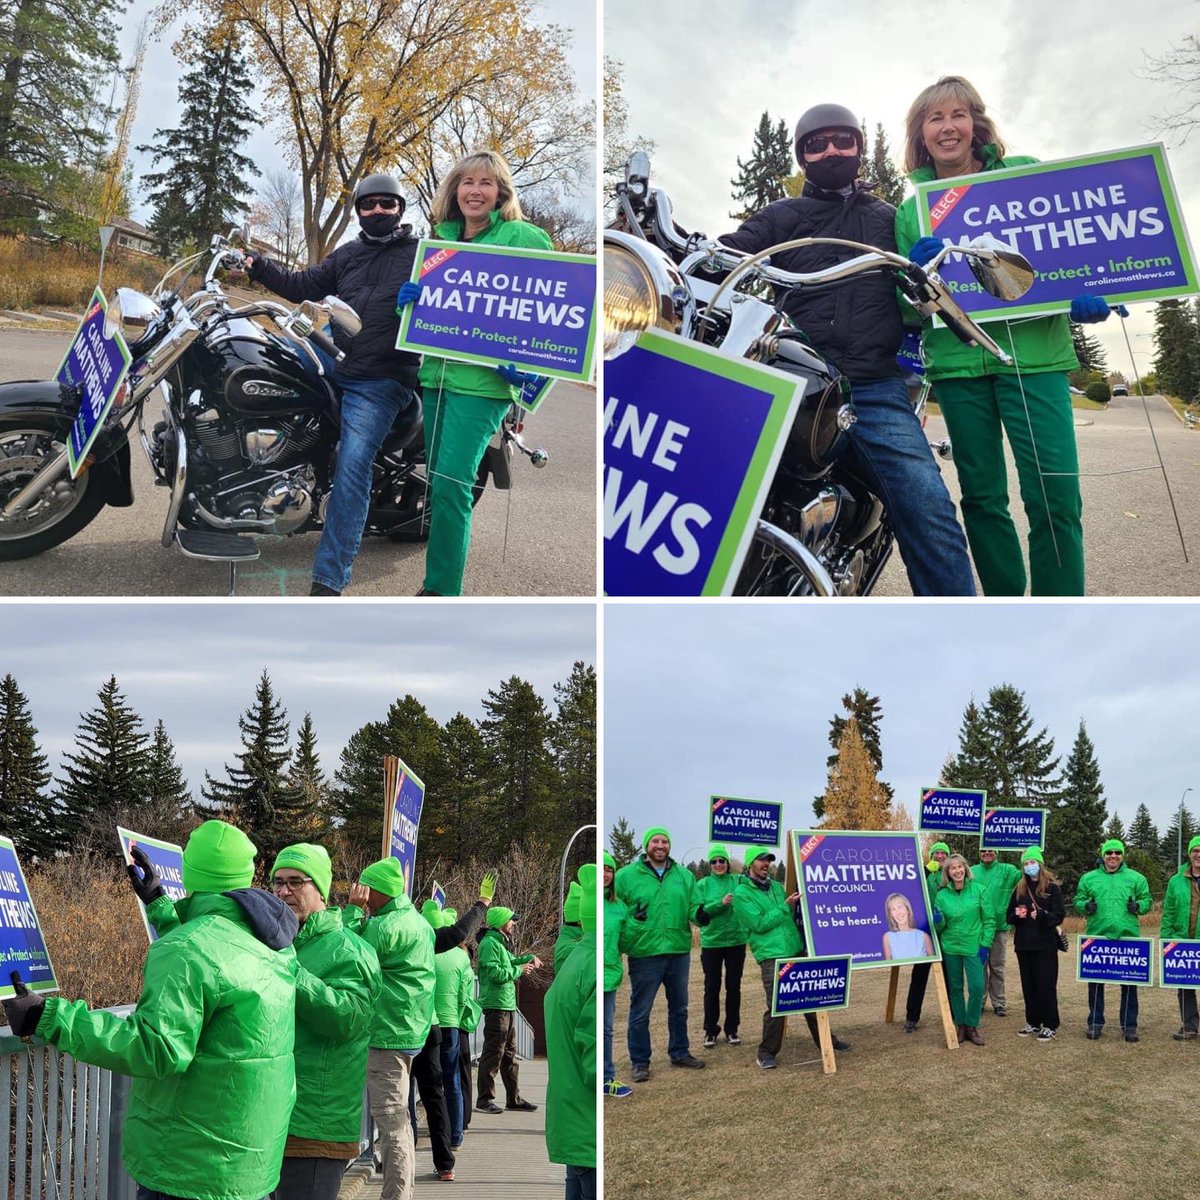 What a great way to spend our last day together before residents vote! An up close photo with Mike, a dedicated supporter out for a ride, and our fantastic group of volunteers who have been there for me during the campaign ! I couldn't have done this past year without you!